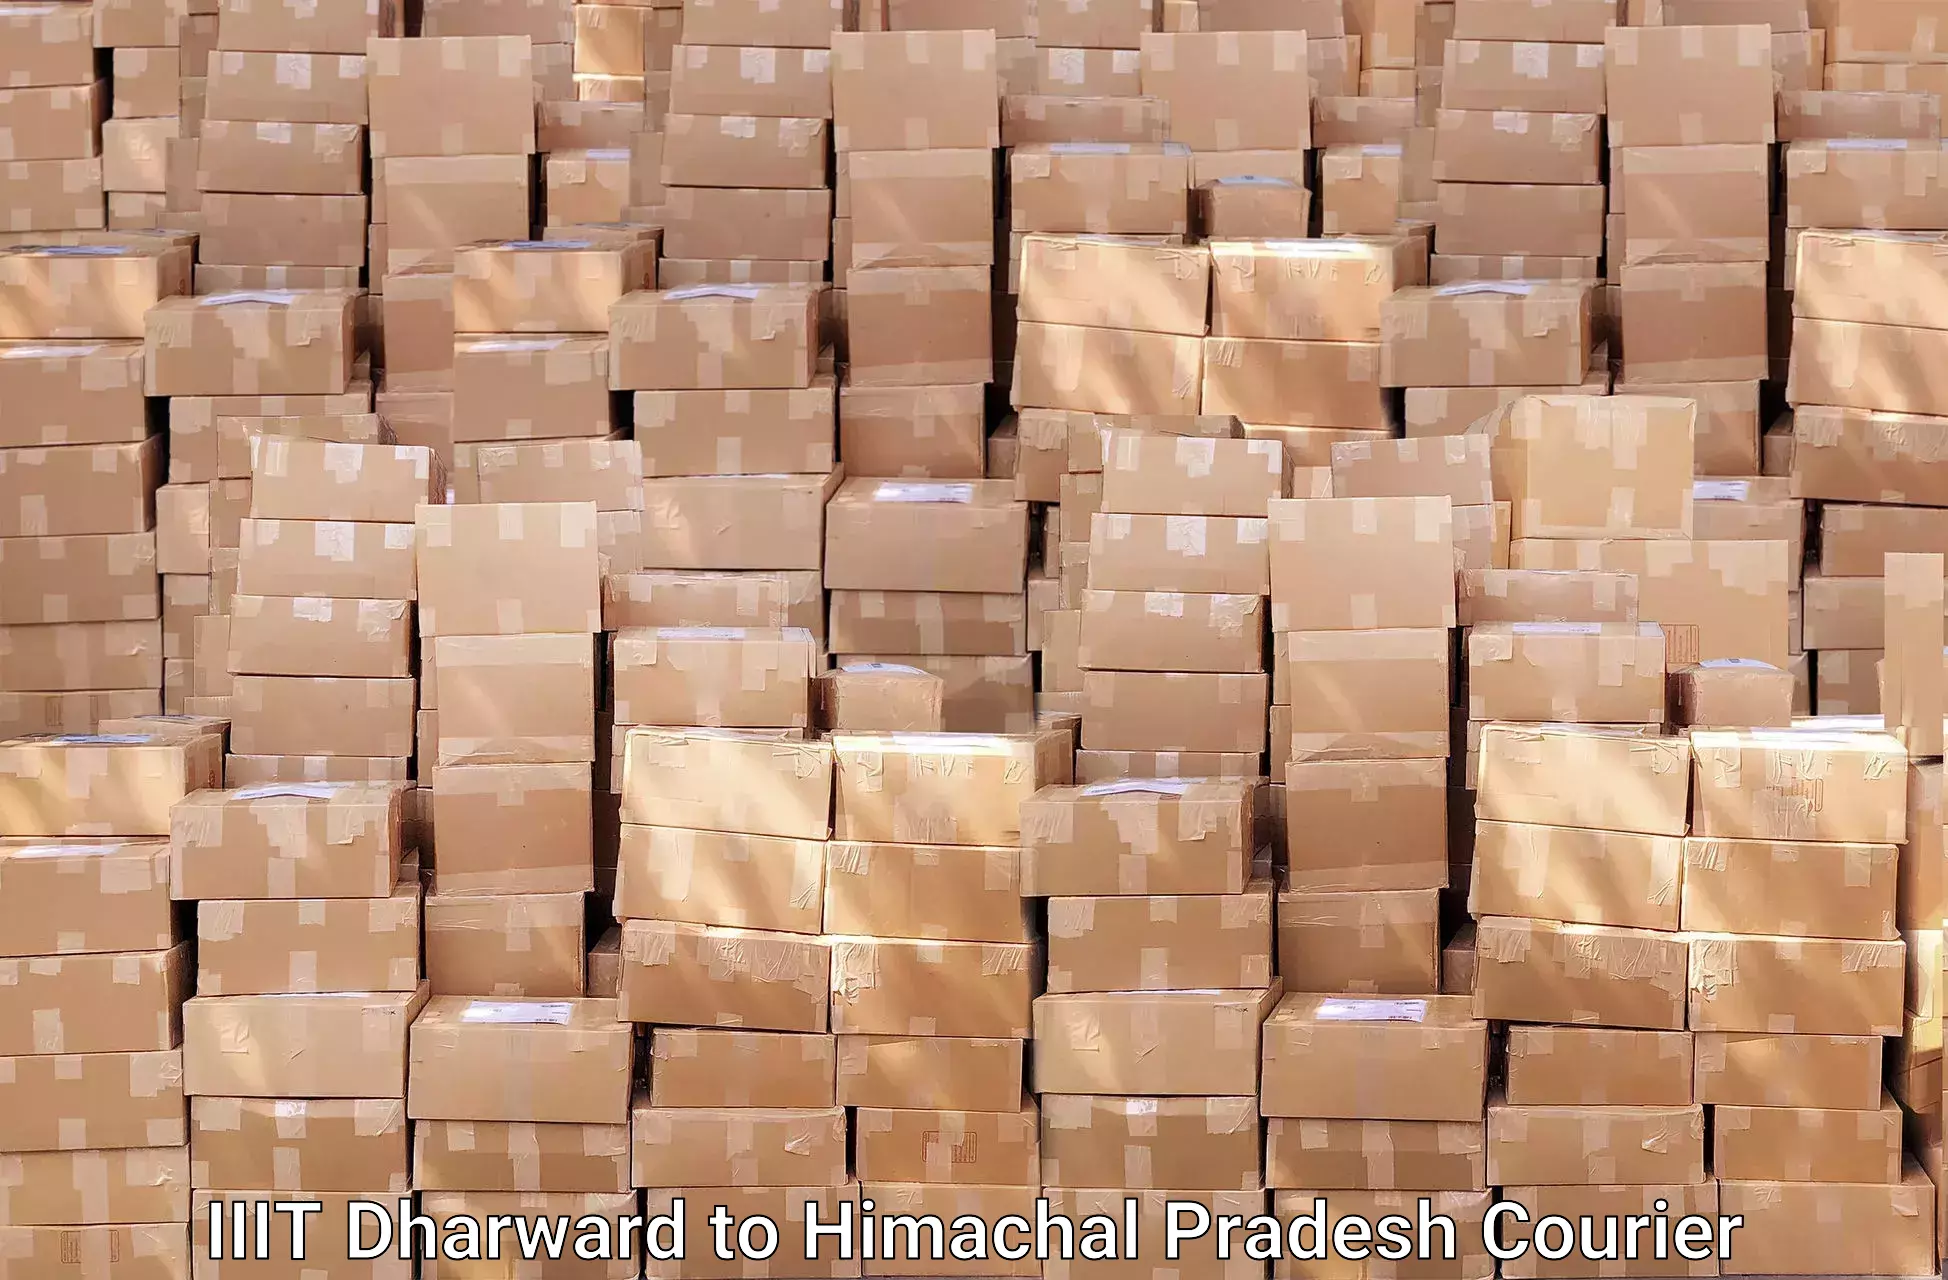 Professional packing services IIIT Dharward to Sandhol